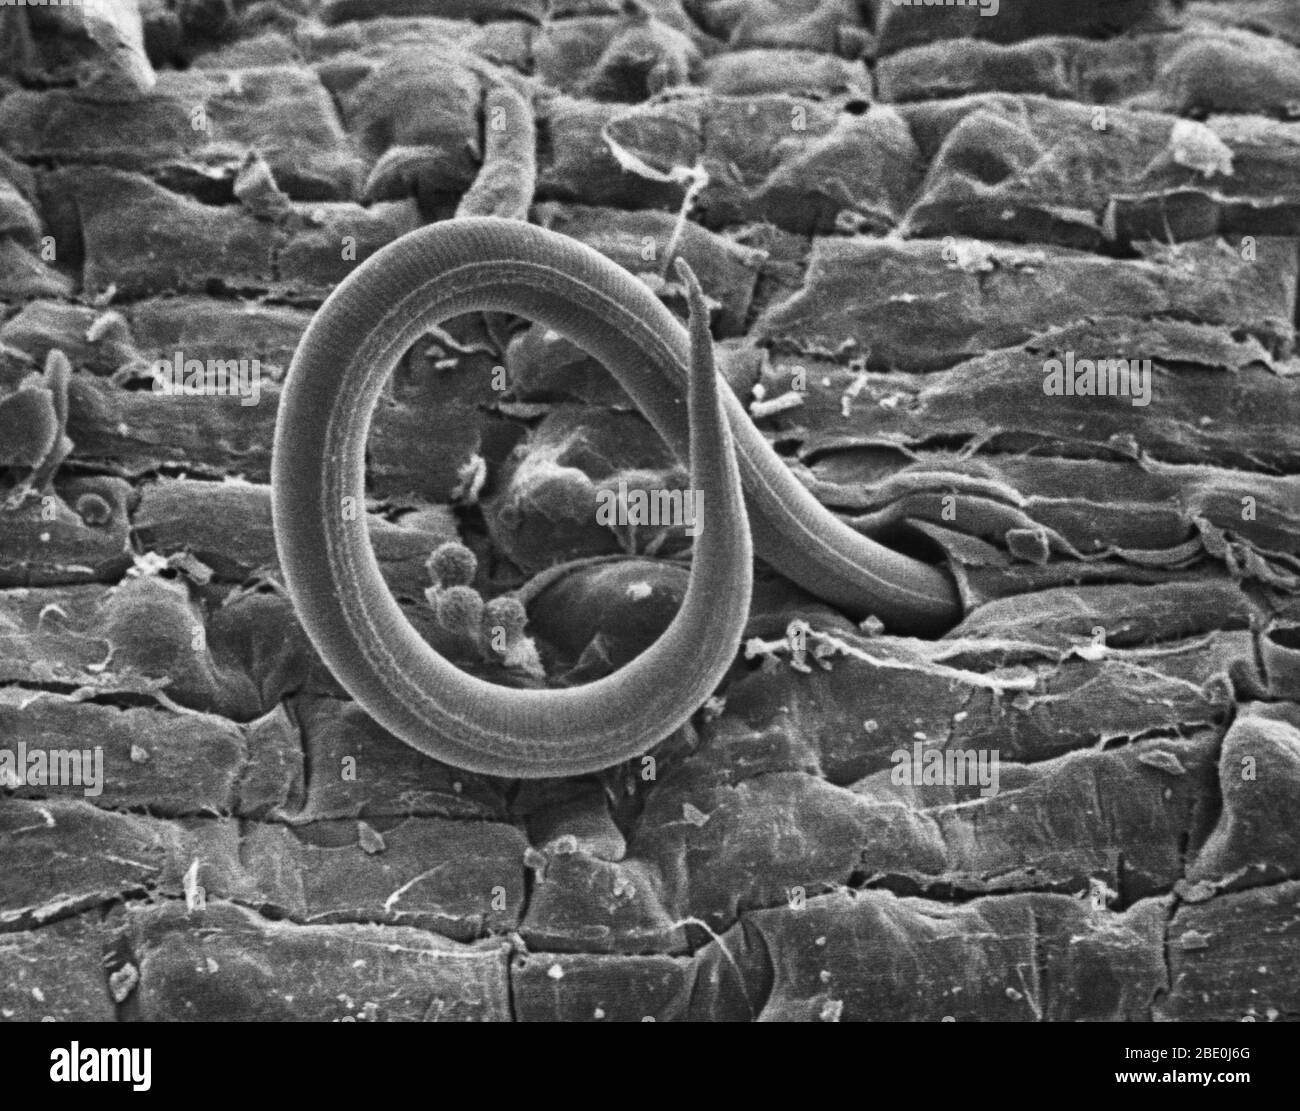 Scanning Electron Micrograph of the whiplike larva of the root-knot nematode Meloidogyne incognita penetrating a tomato root. Once inside, the larva establishes a feeding site and causes nutrient-robbing galls to form on cells. As the larva consumes nutrients, the plant's growth is stunted. Magnification 900x at 8'x10'. Stock Photo